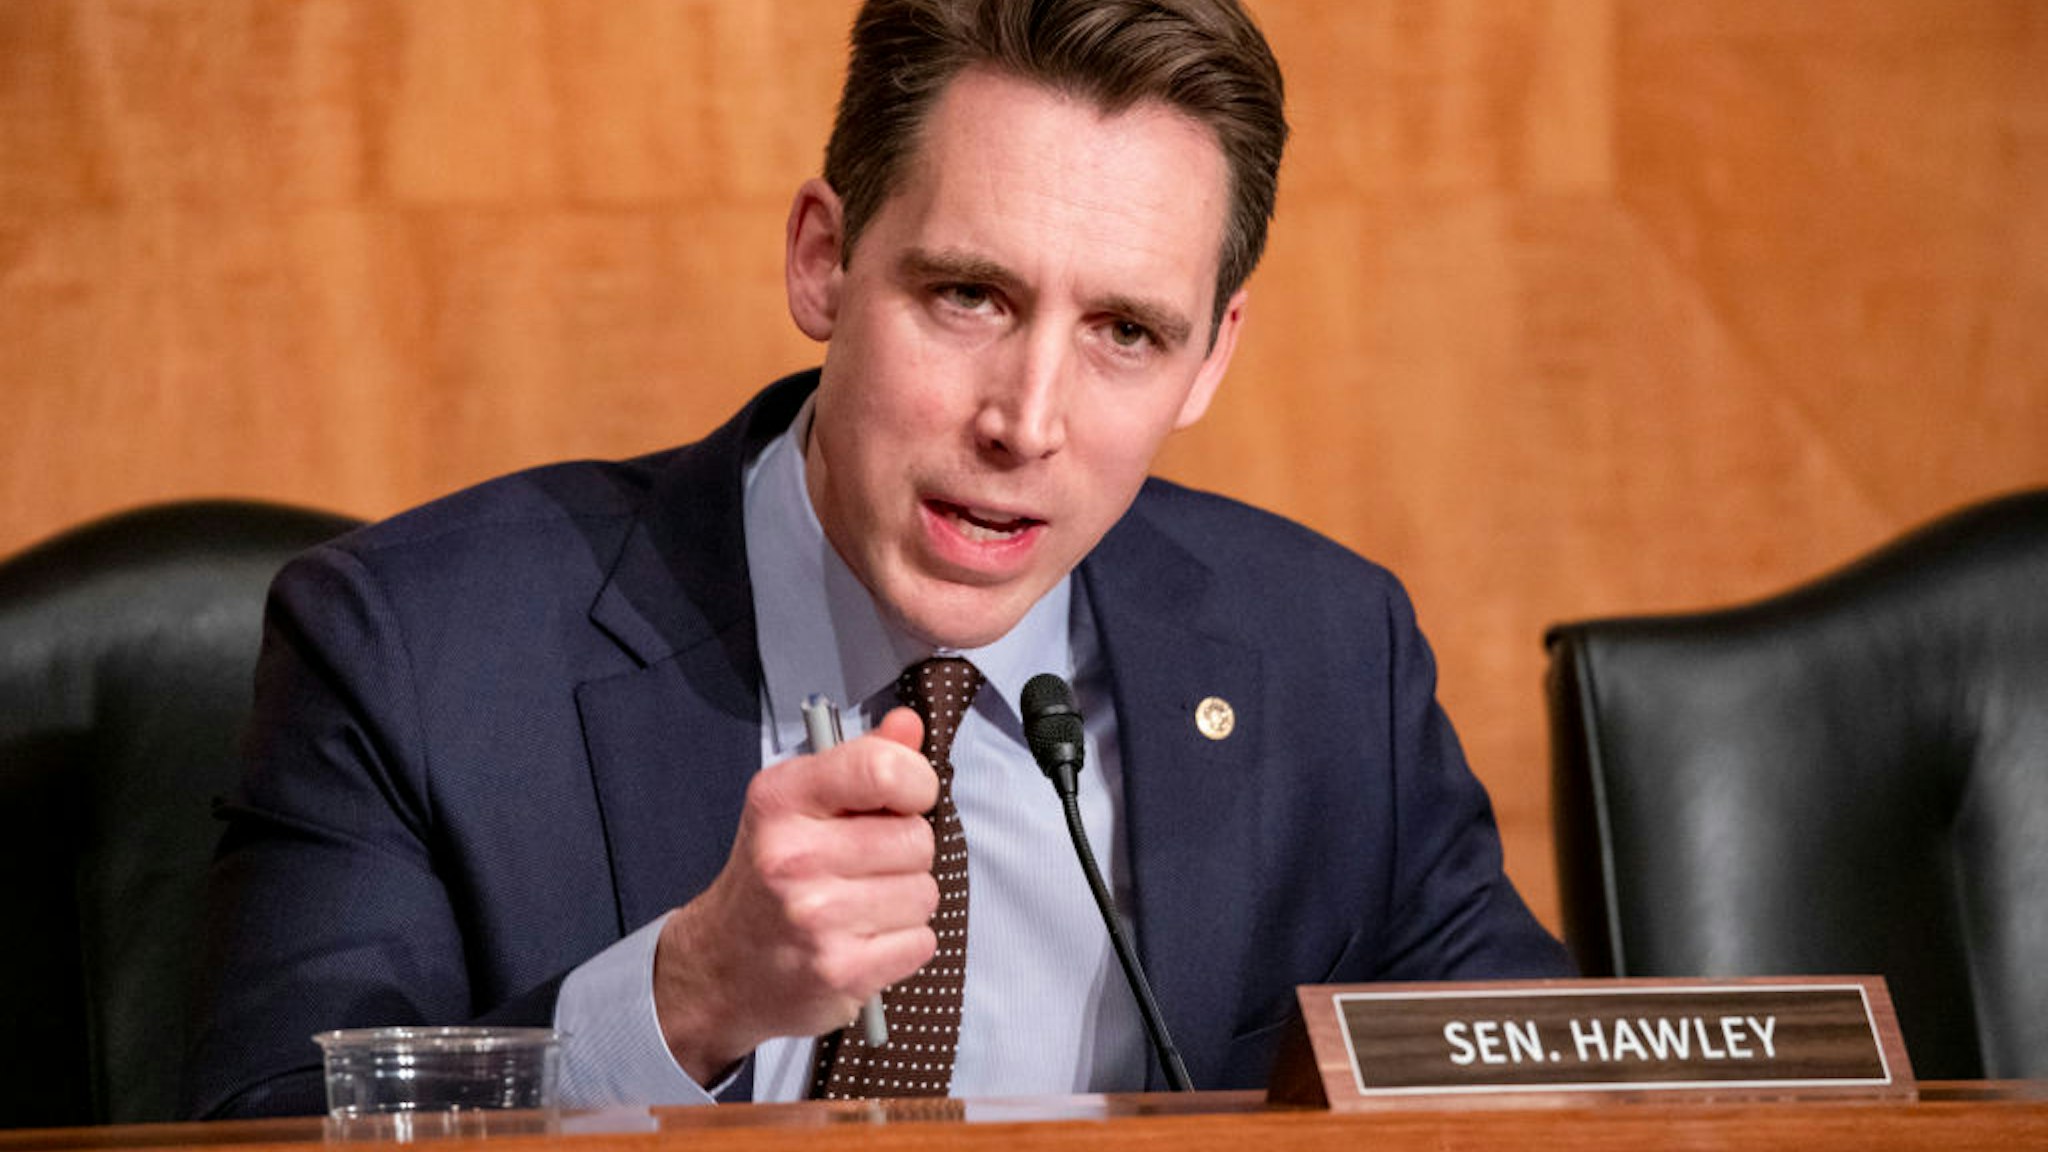 Sen. Josh Hawley (R-MO) questions Department of Justice Inspector General Michael Horowitz during a Senate Committee On Homeland Security And Governmental Affairs hearing at the US Capitol on December 18, 2019 in Washington, DC.